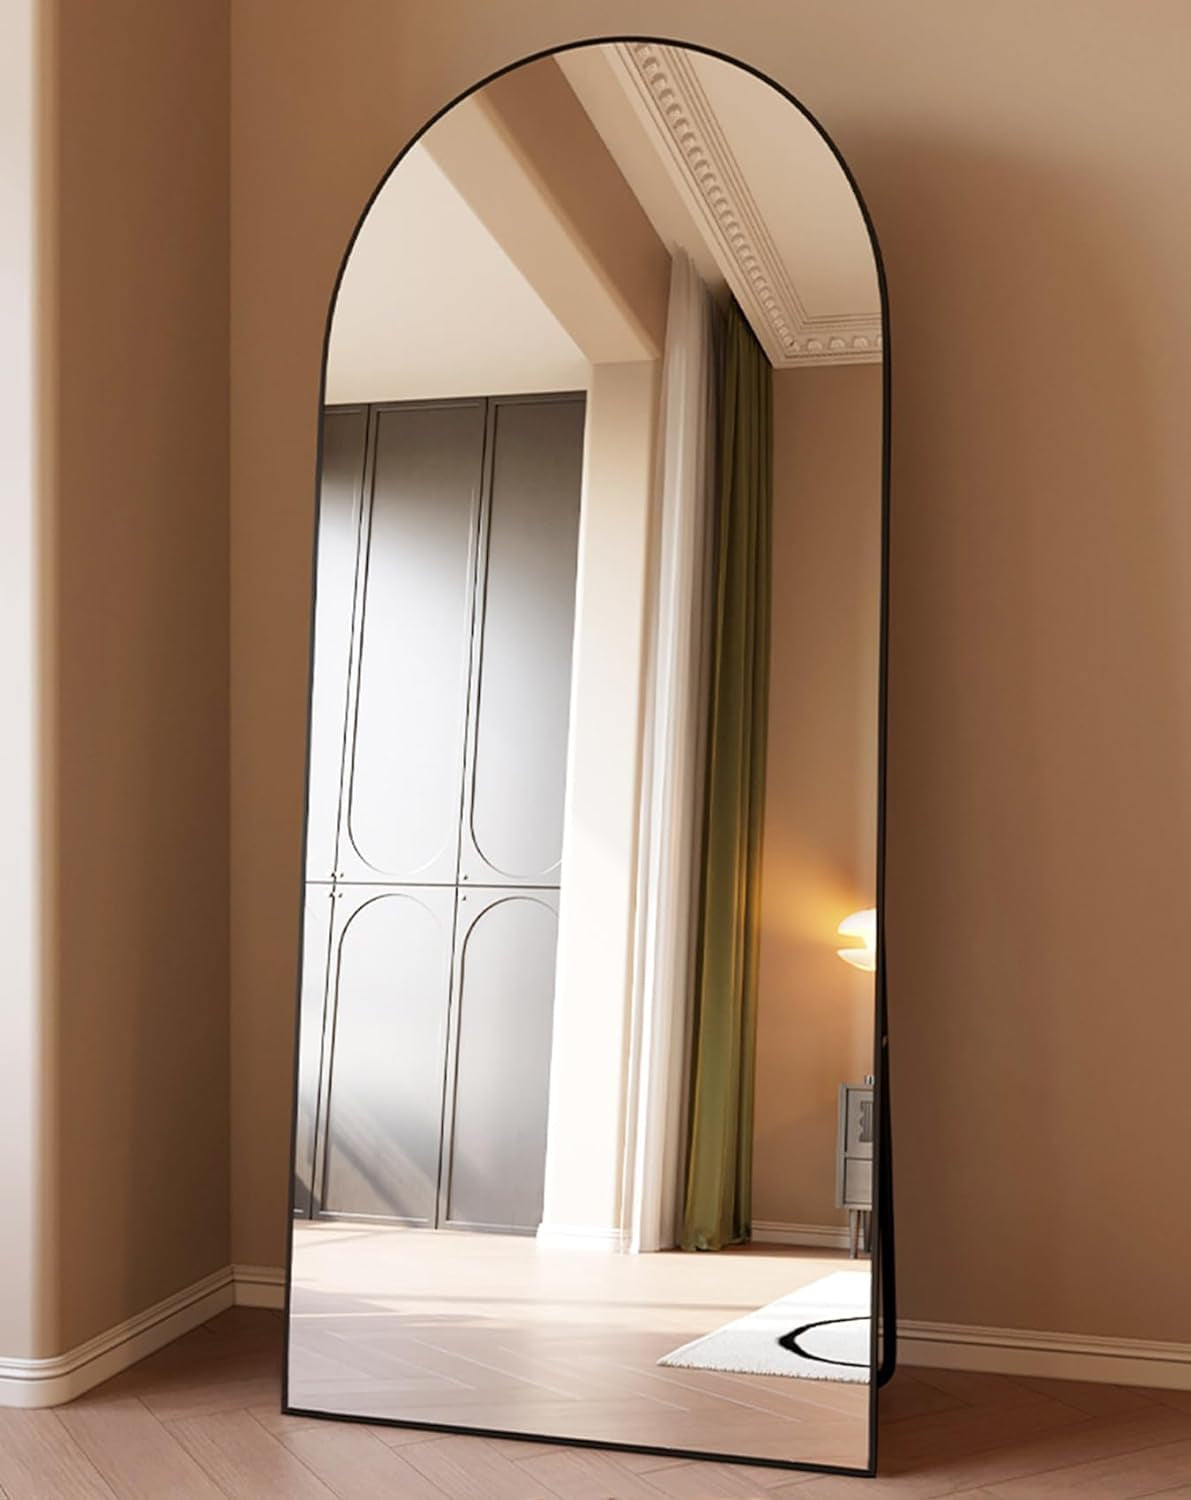 Floor Mirror, Full Length Mirror with Stand, Arched Wall Mirror, 28"X71" Mirror Full Length, Black Floor Mirror Freestanding, Wall Mounted Mirror for Bedroom Living Room, Black - Design By Technique